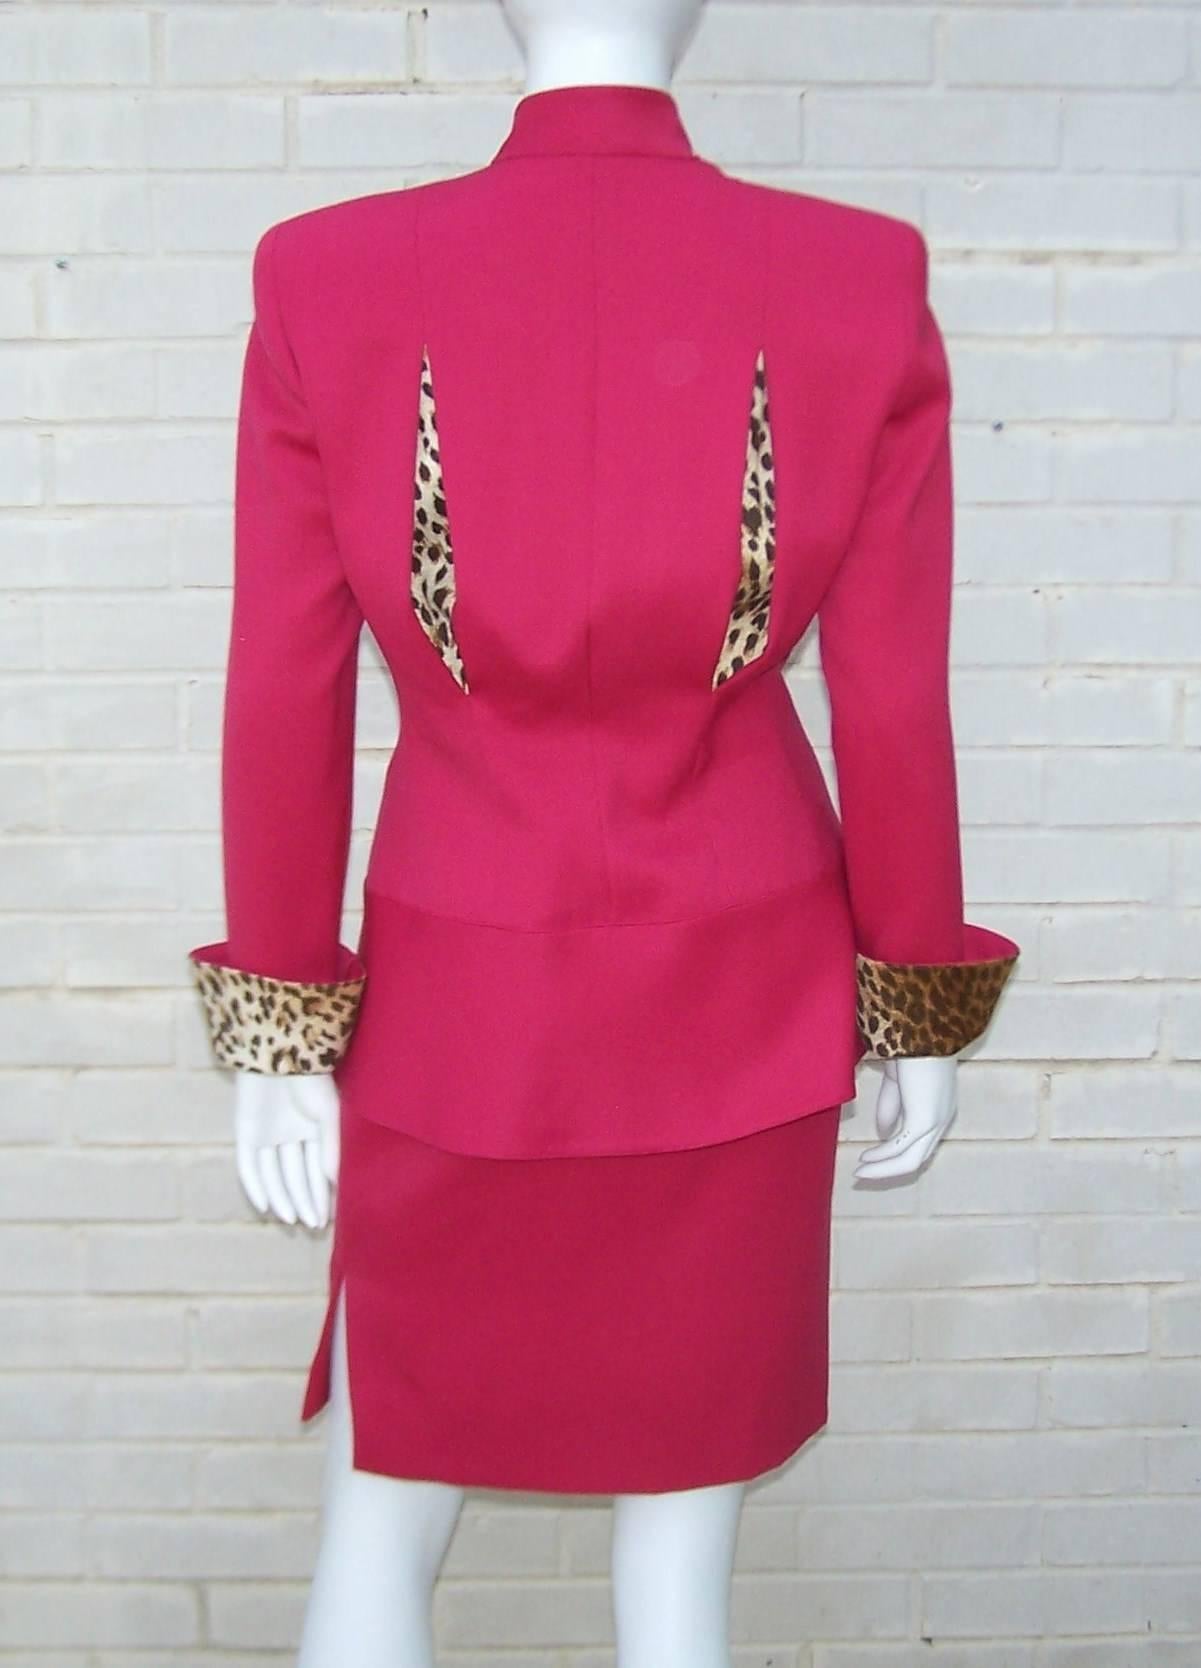 C.1990 Raspberry Red Valentino Dress Suit With Cheetah Print Vents & Cuffs 1